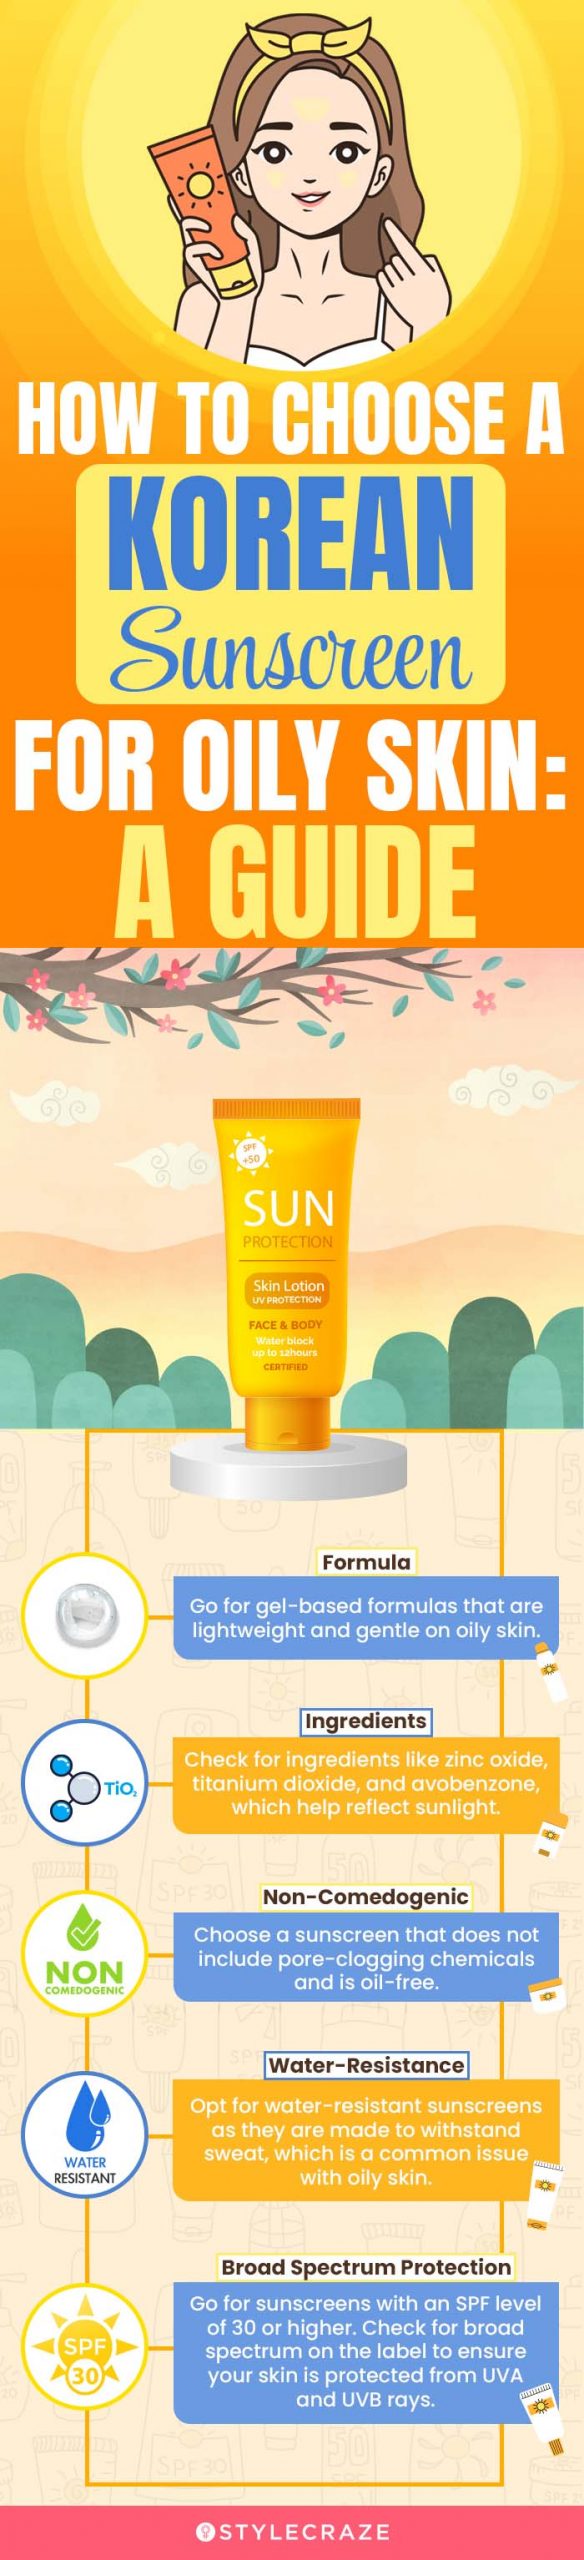 How to choose a Korean sunscreen for oily skin [infographic]